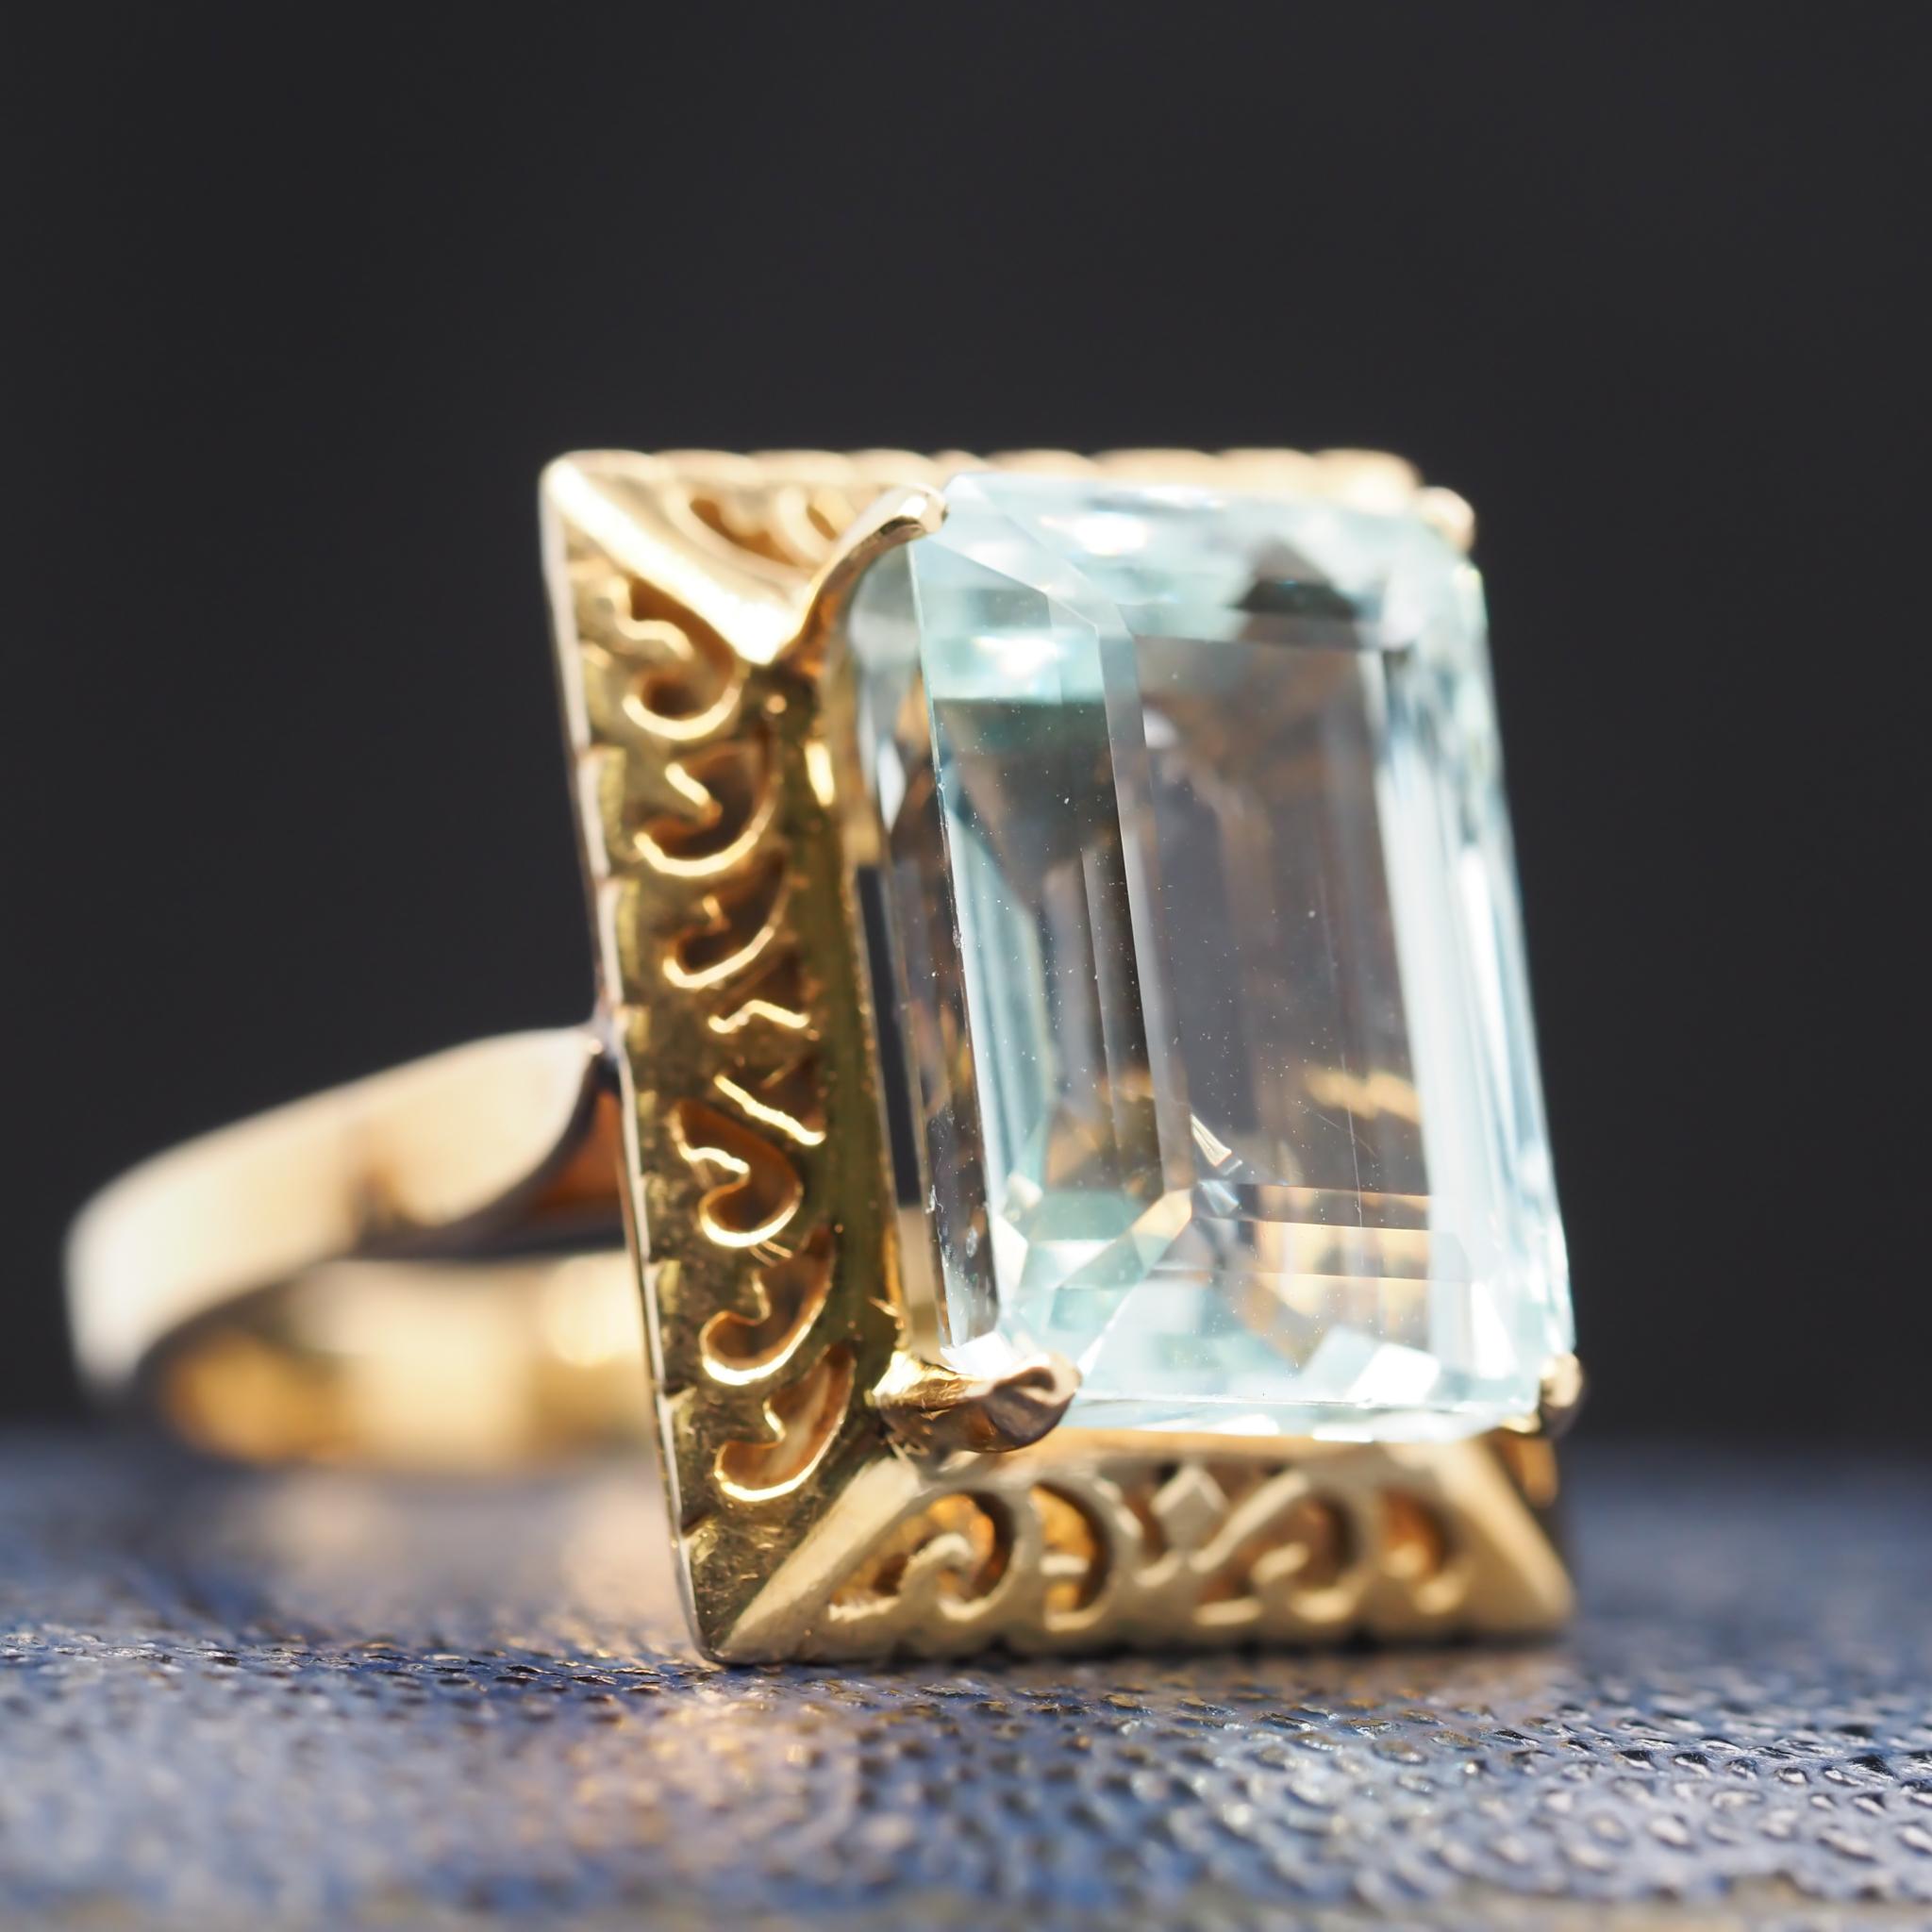 Ring Size: 7.5
Metal Type: 18K Yellow Gold [Hallmarked, and Tested]
Weight: 8.6 grams

Aquamarine Details: Light Blue, Natural, 8.00CT, Emerald Cut

Band Width: 2mm